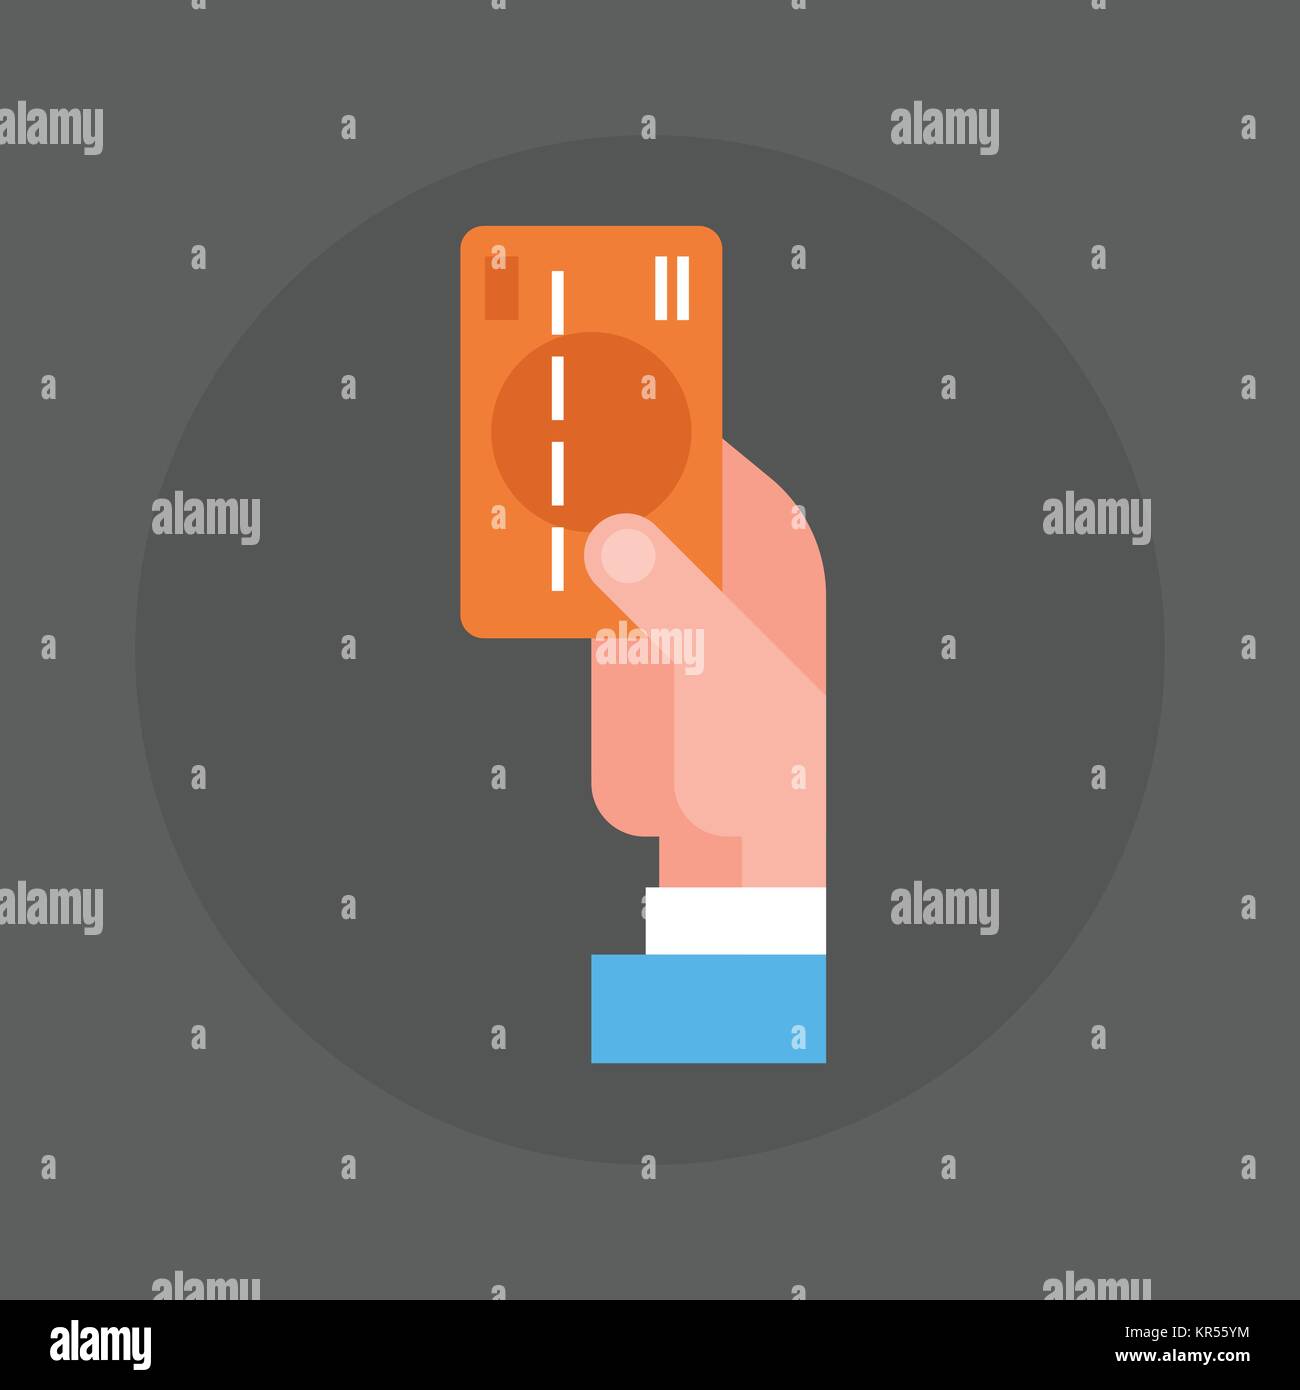 Business Man Hand Holding Credit Card Icon Stock Vector